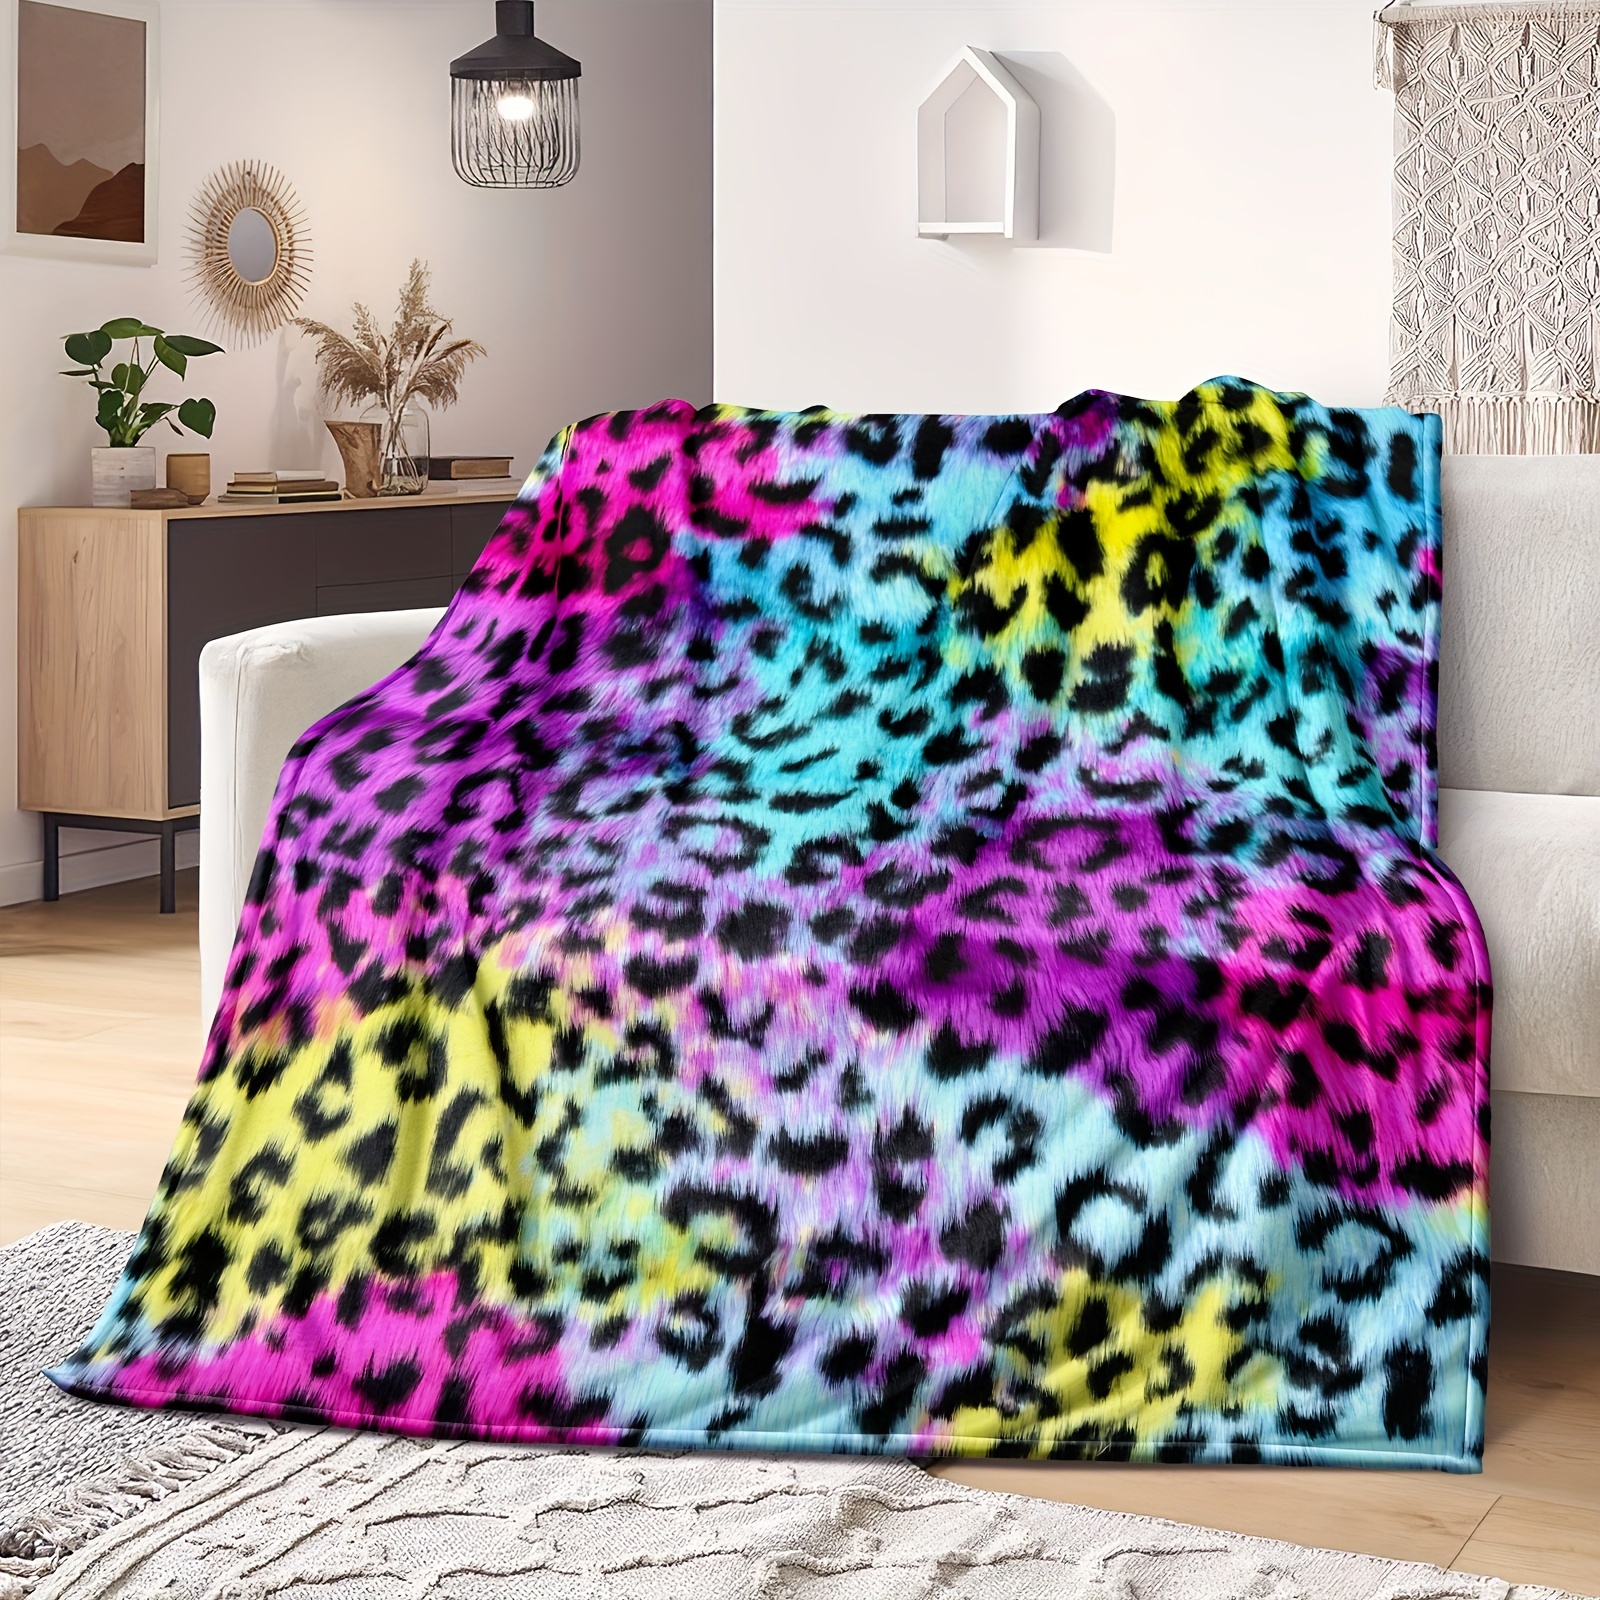 

1pc, Leopard Print Blanket, Rainbow Tie Dye Throw Blanket, Colorful Print Fleece Blanket, Neon Rainbow Leopard All Season Warm And Cozy Quilt Blanket For Bed Sofa Couch